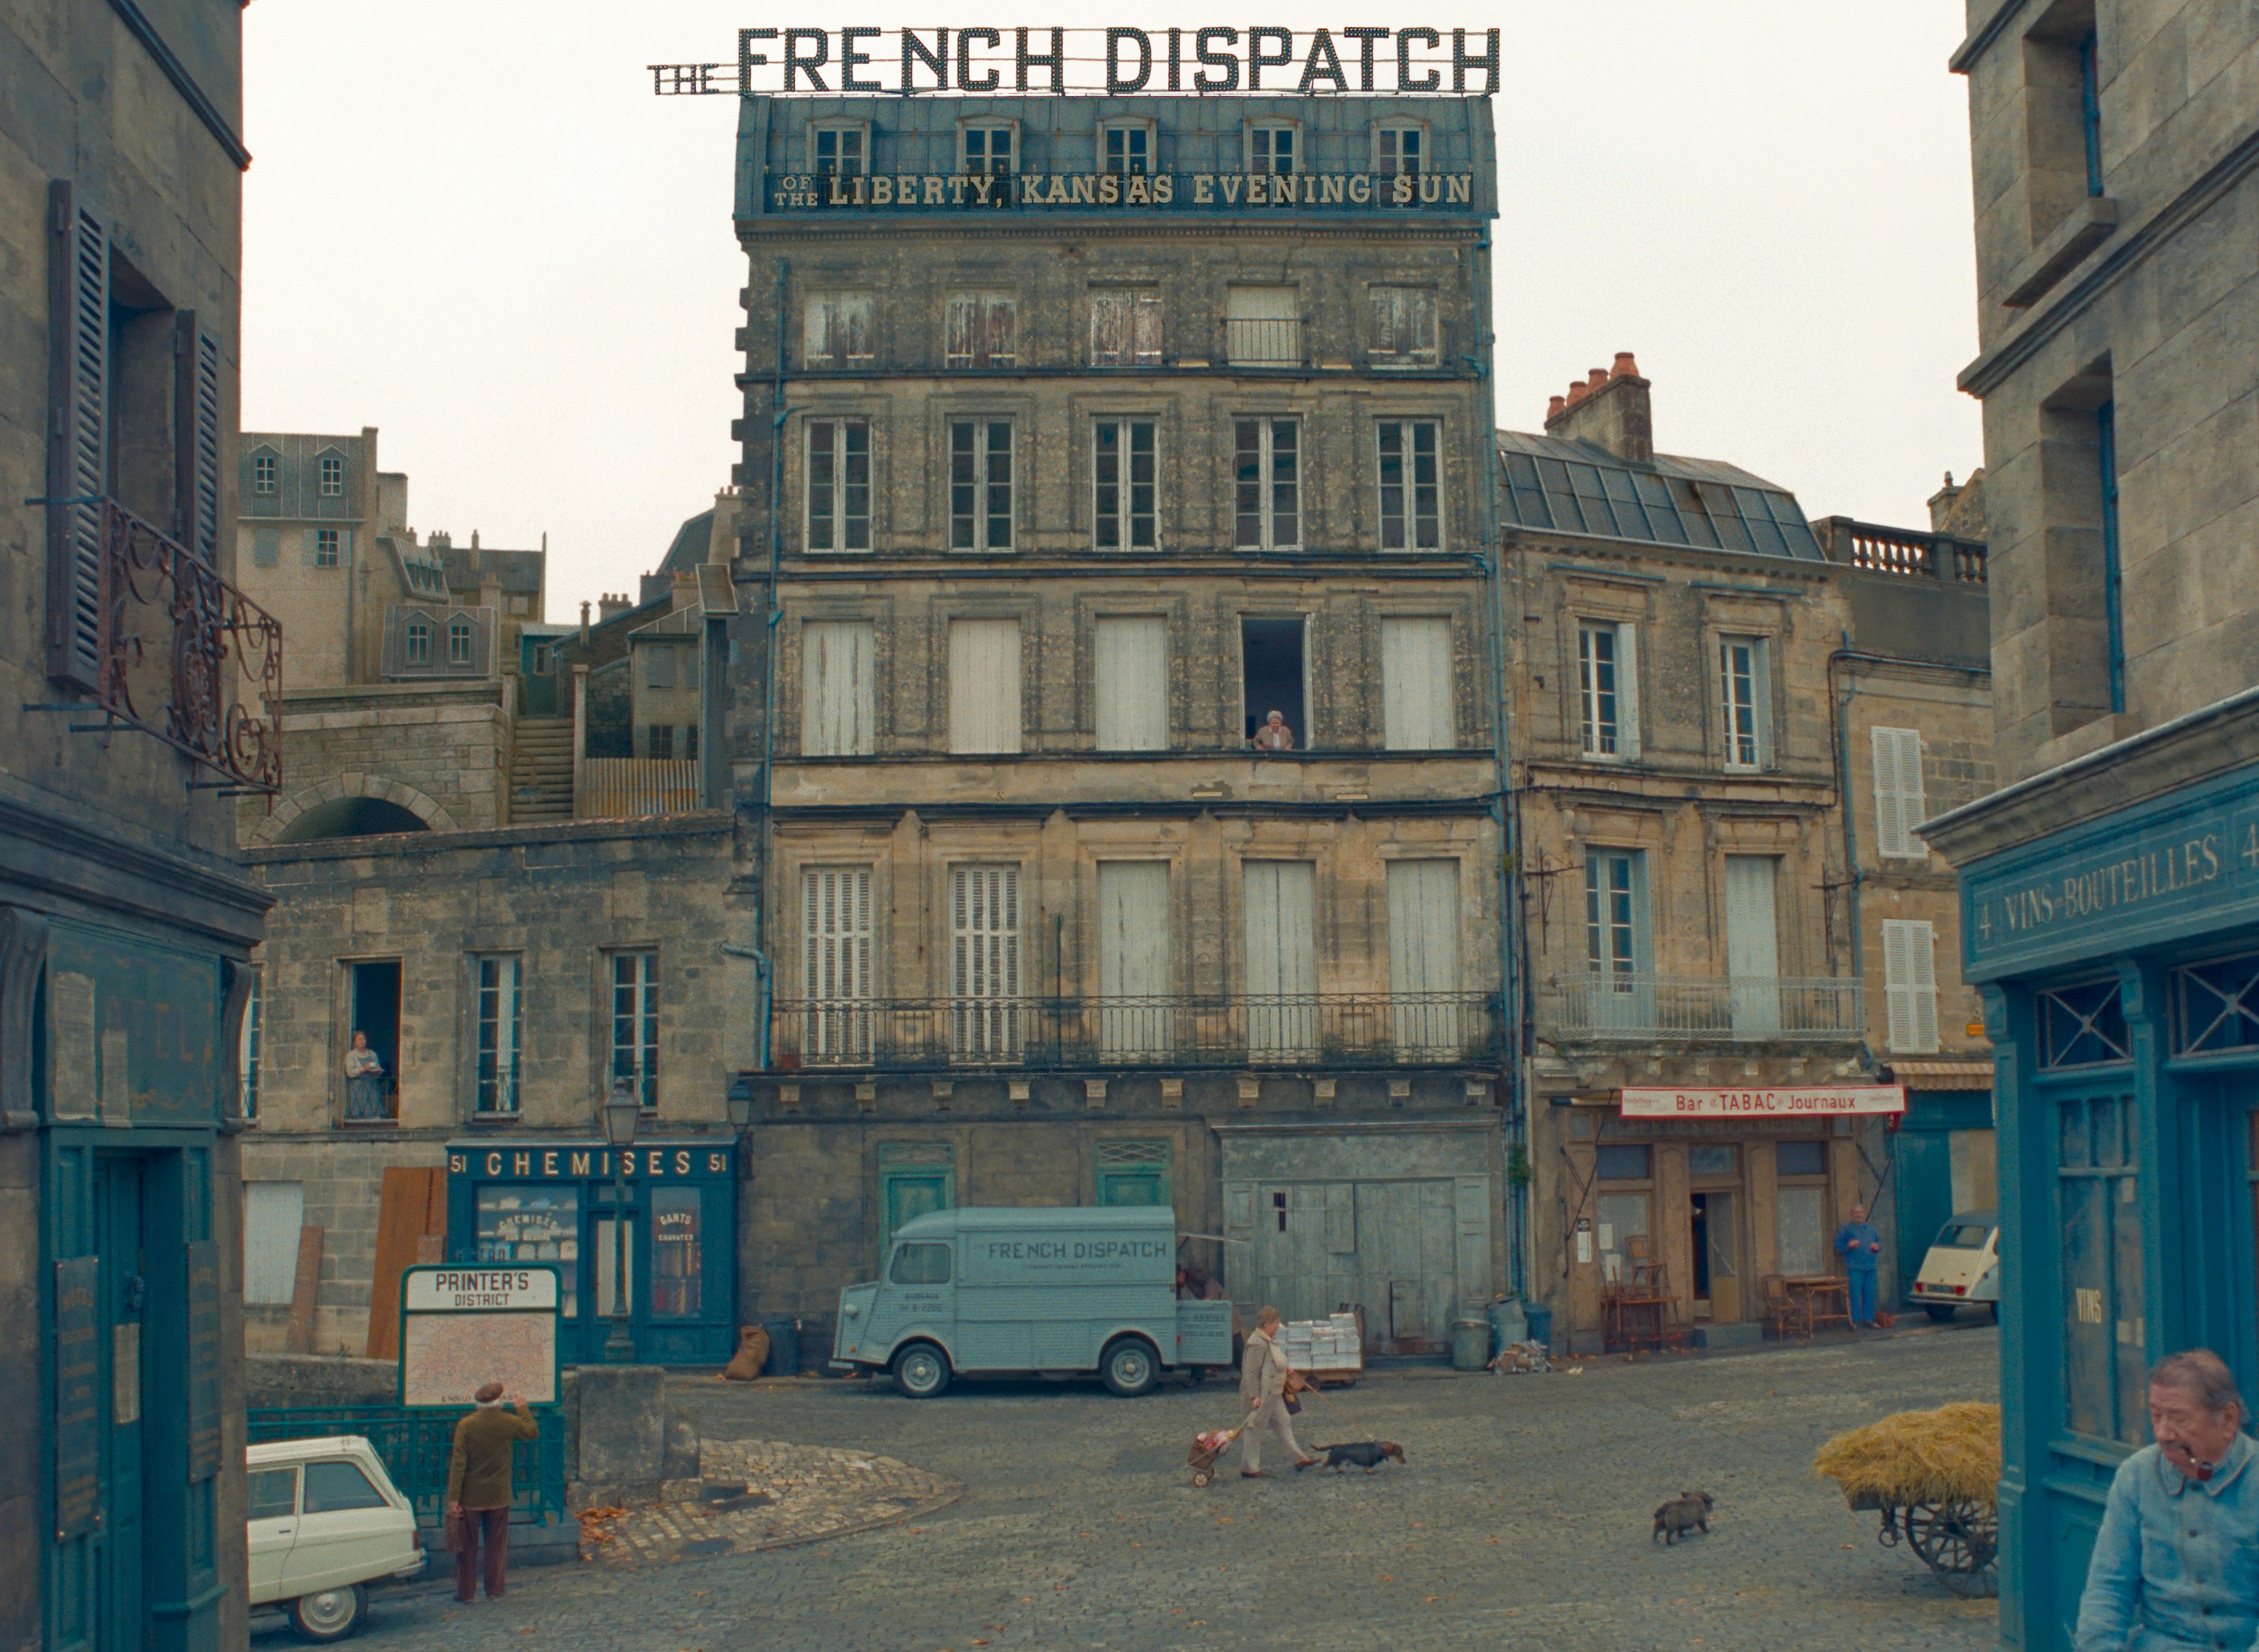 A still from the film The French Dispatch which depicts an exterior shot of a newspaper office